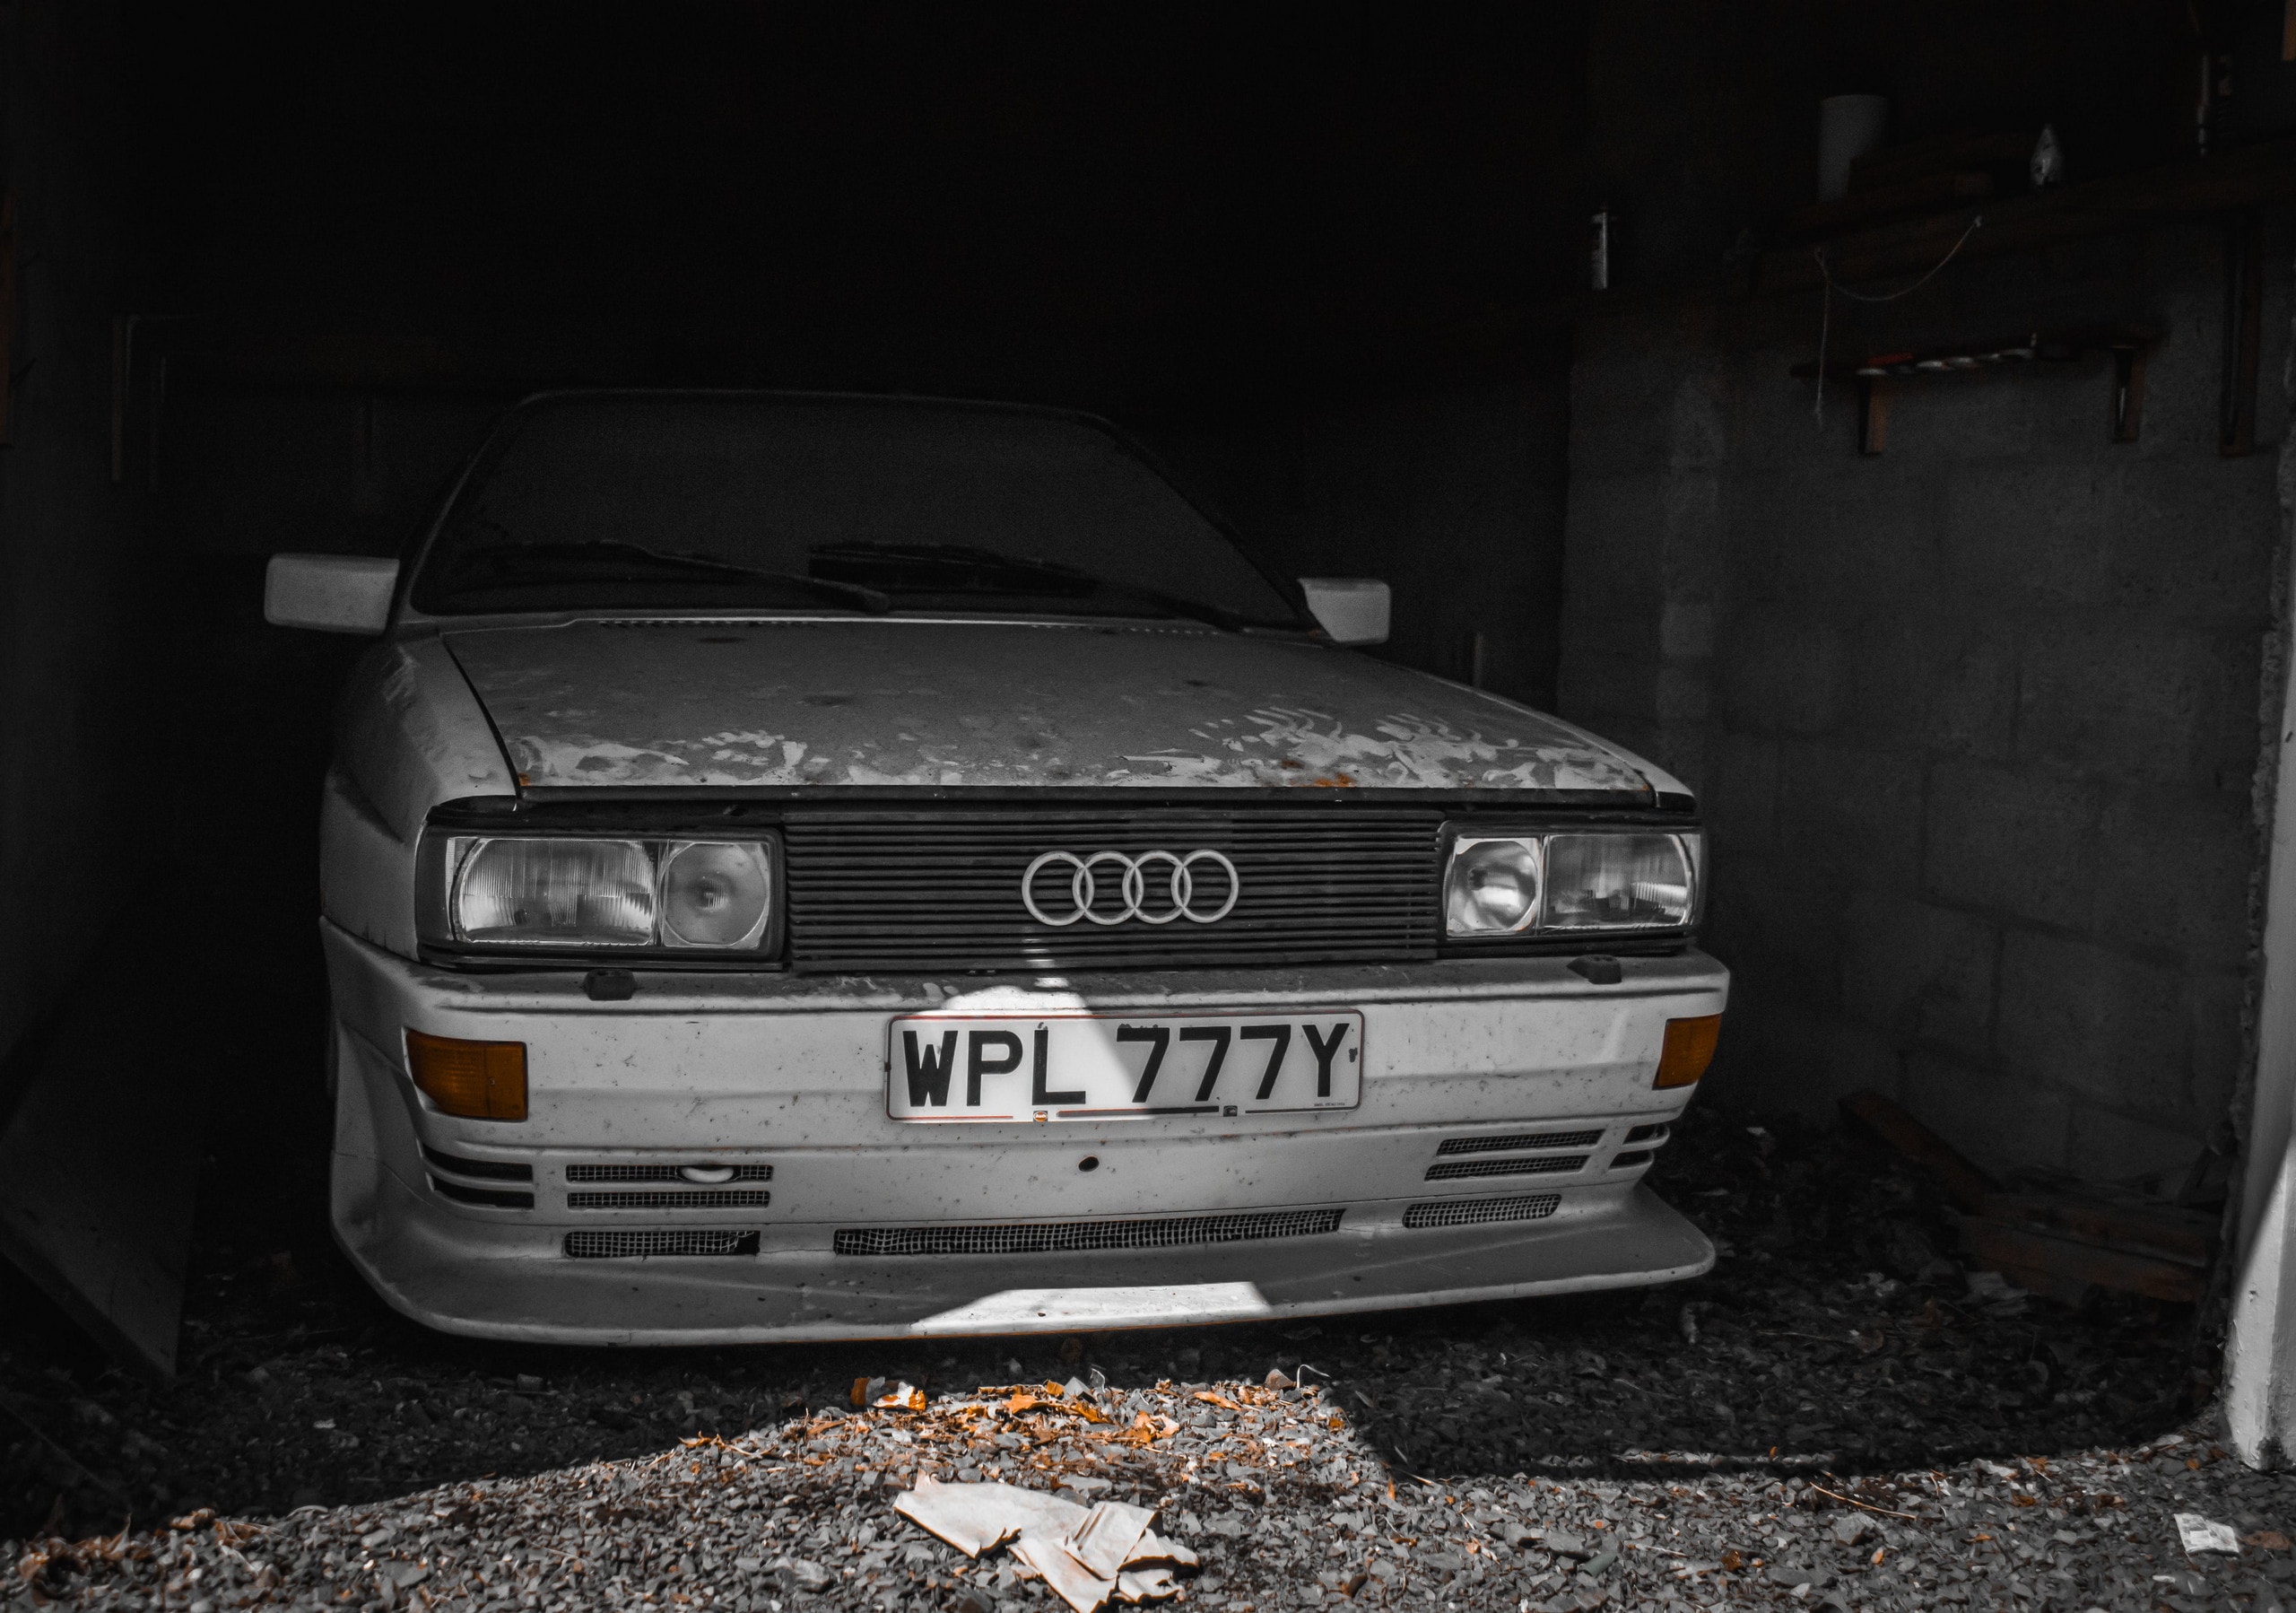 https://s1.cdn.autoevolution.com/images/news/holy-mother-of-barn-finds-abandoned-audi-quattro-found-in-storage-after-almost-30-years-191120_1.jpg